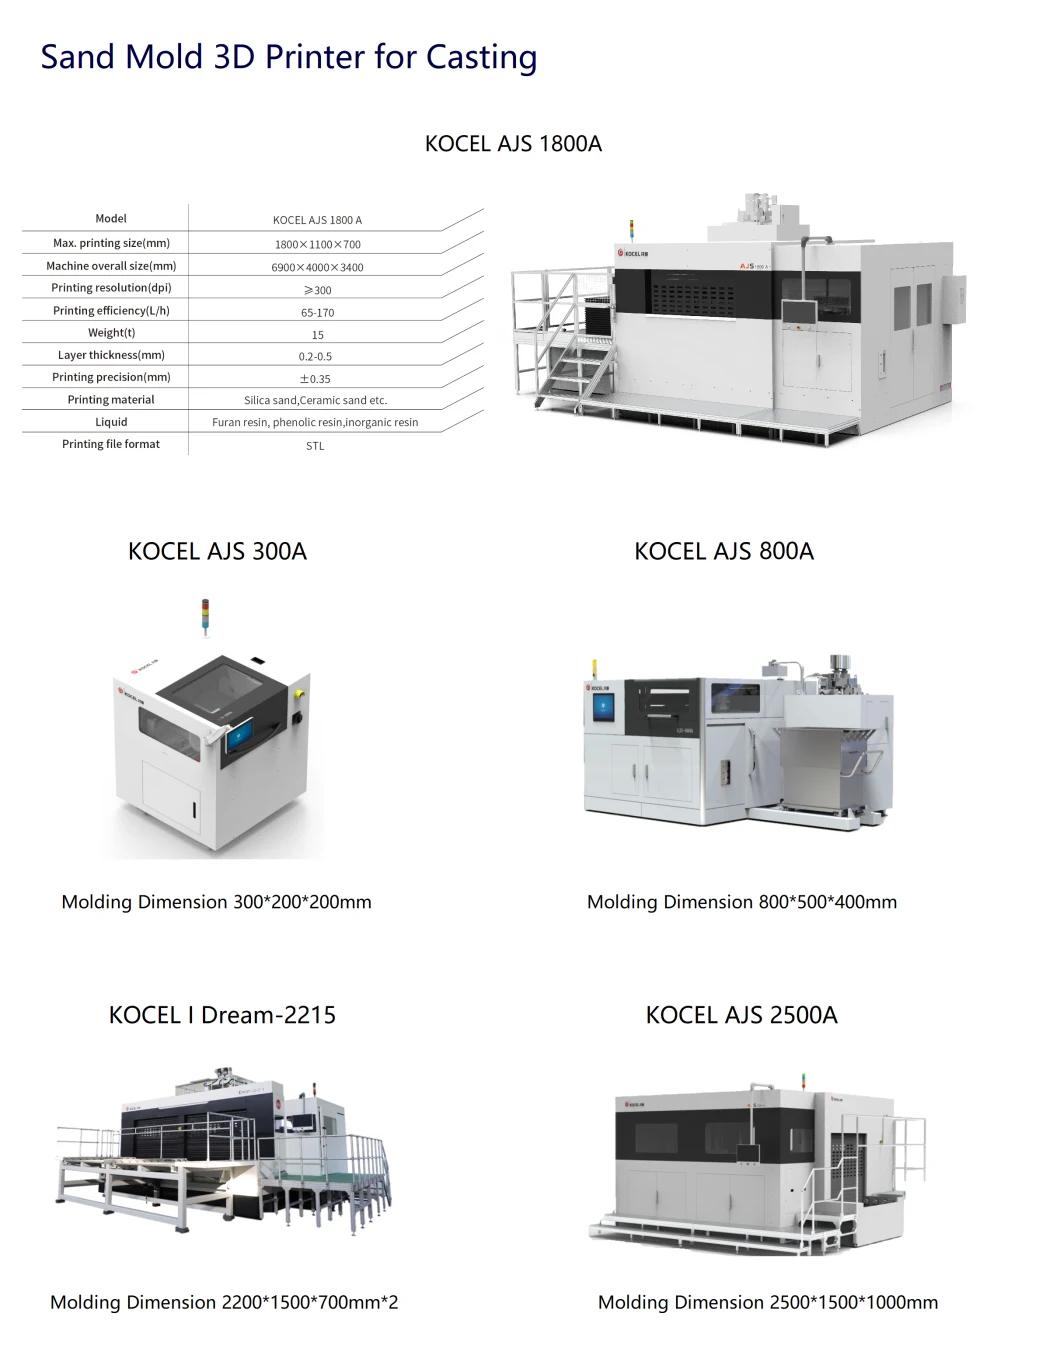 KOCEL Customized 3D Printing High-Precision Sand Casting by Industrial Foundry Sand Mold 3D Printer